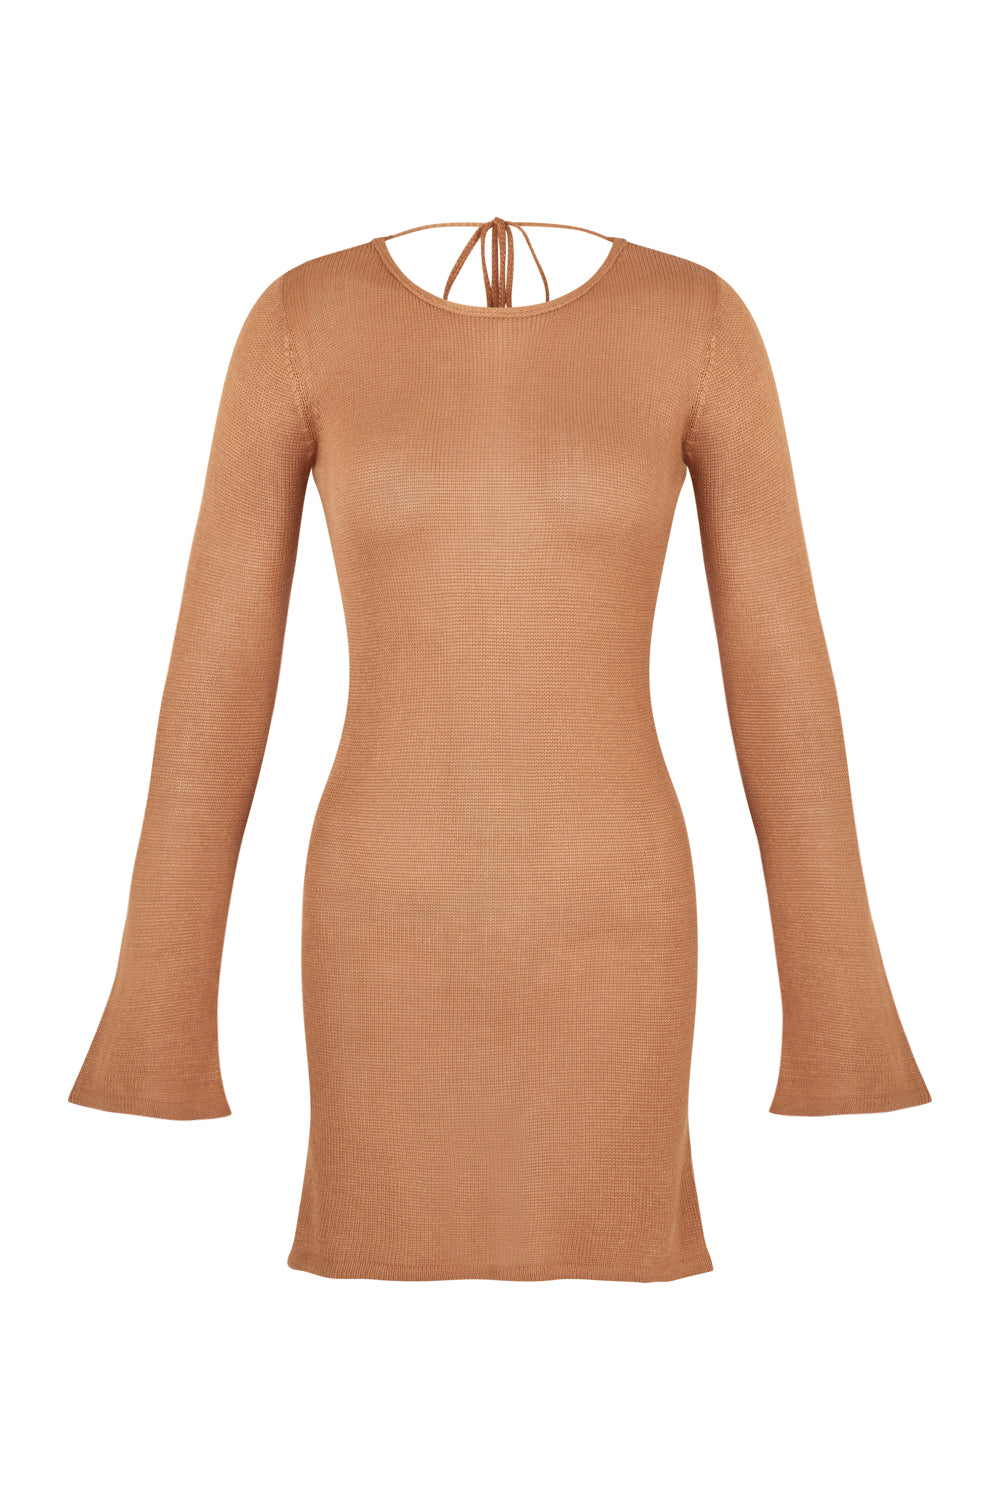 flook the label elysia mini dress tangerine knit product image front 